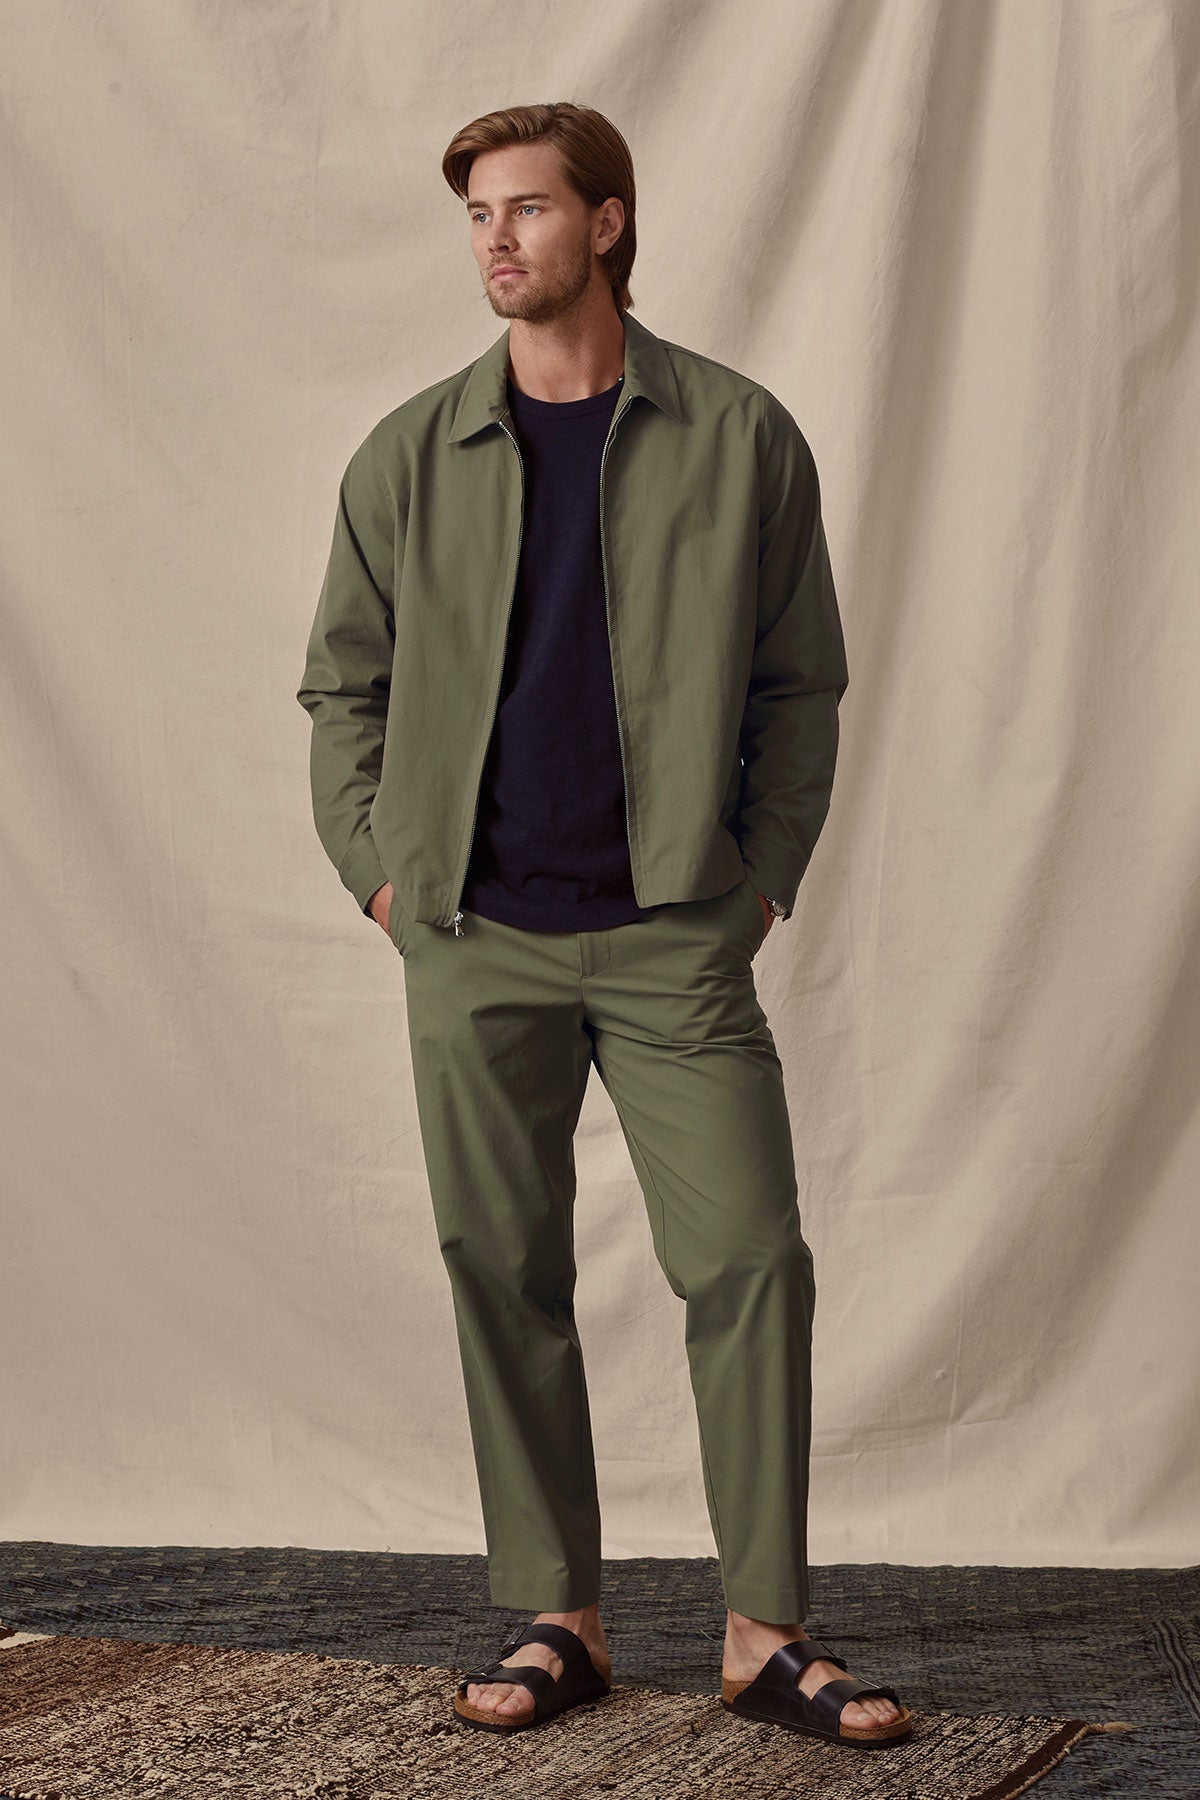 A man models a casual olive green Velvet by Graham & Spencer ALTON POPLIN ZIP-UP JACKET and trousers with a navy t-shirt and black sandals against a cream backdrop.-36299656298689